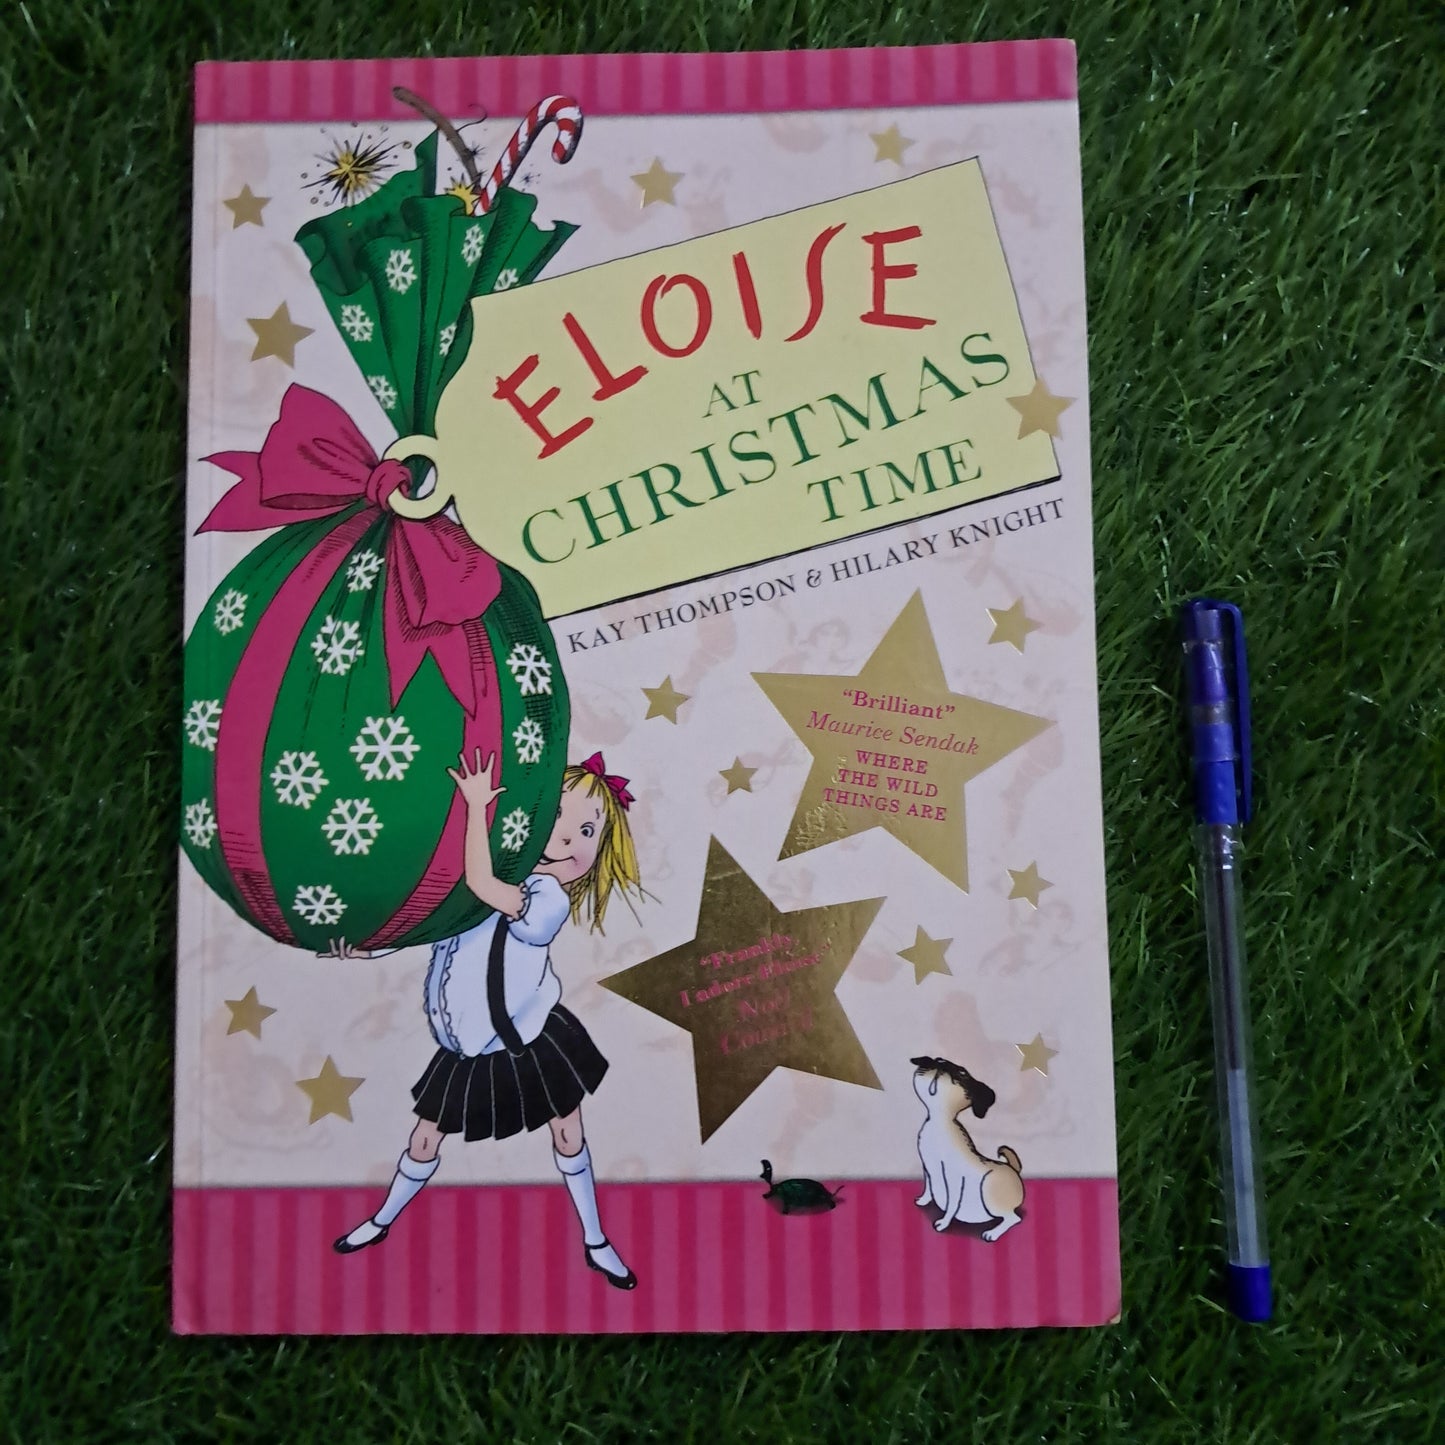 ELOISE AT CHRISTMAS TIME